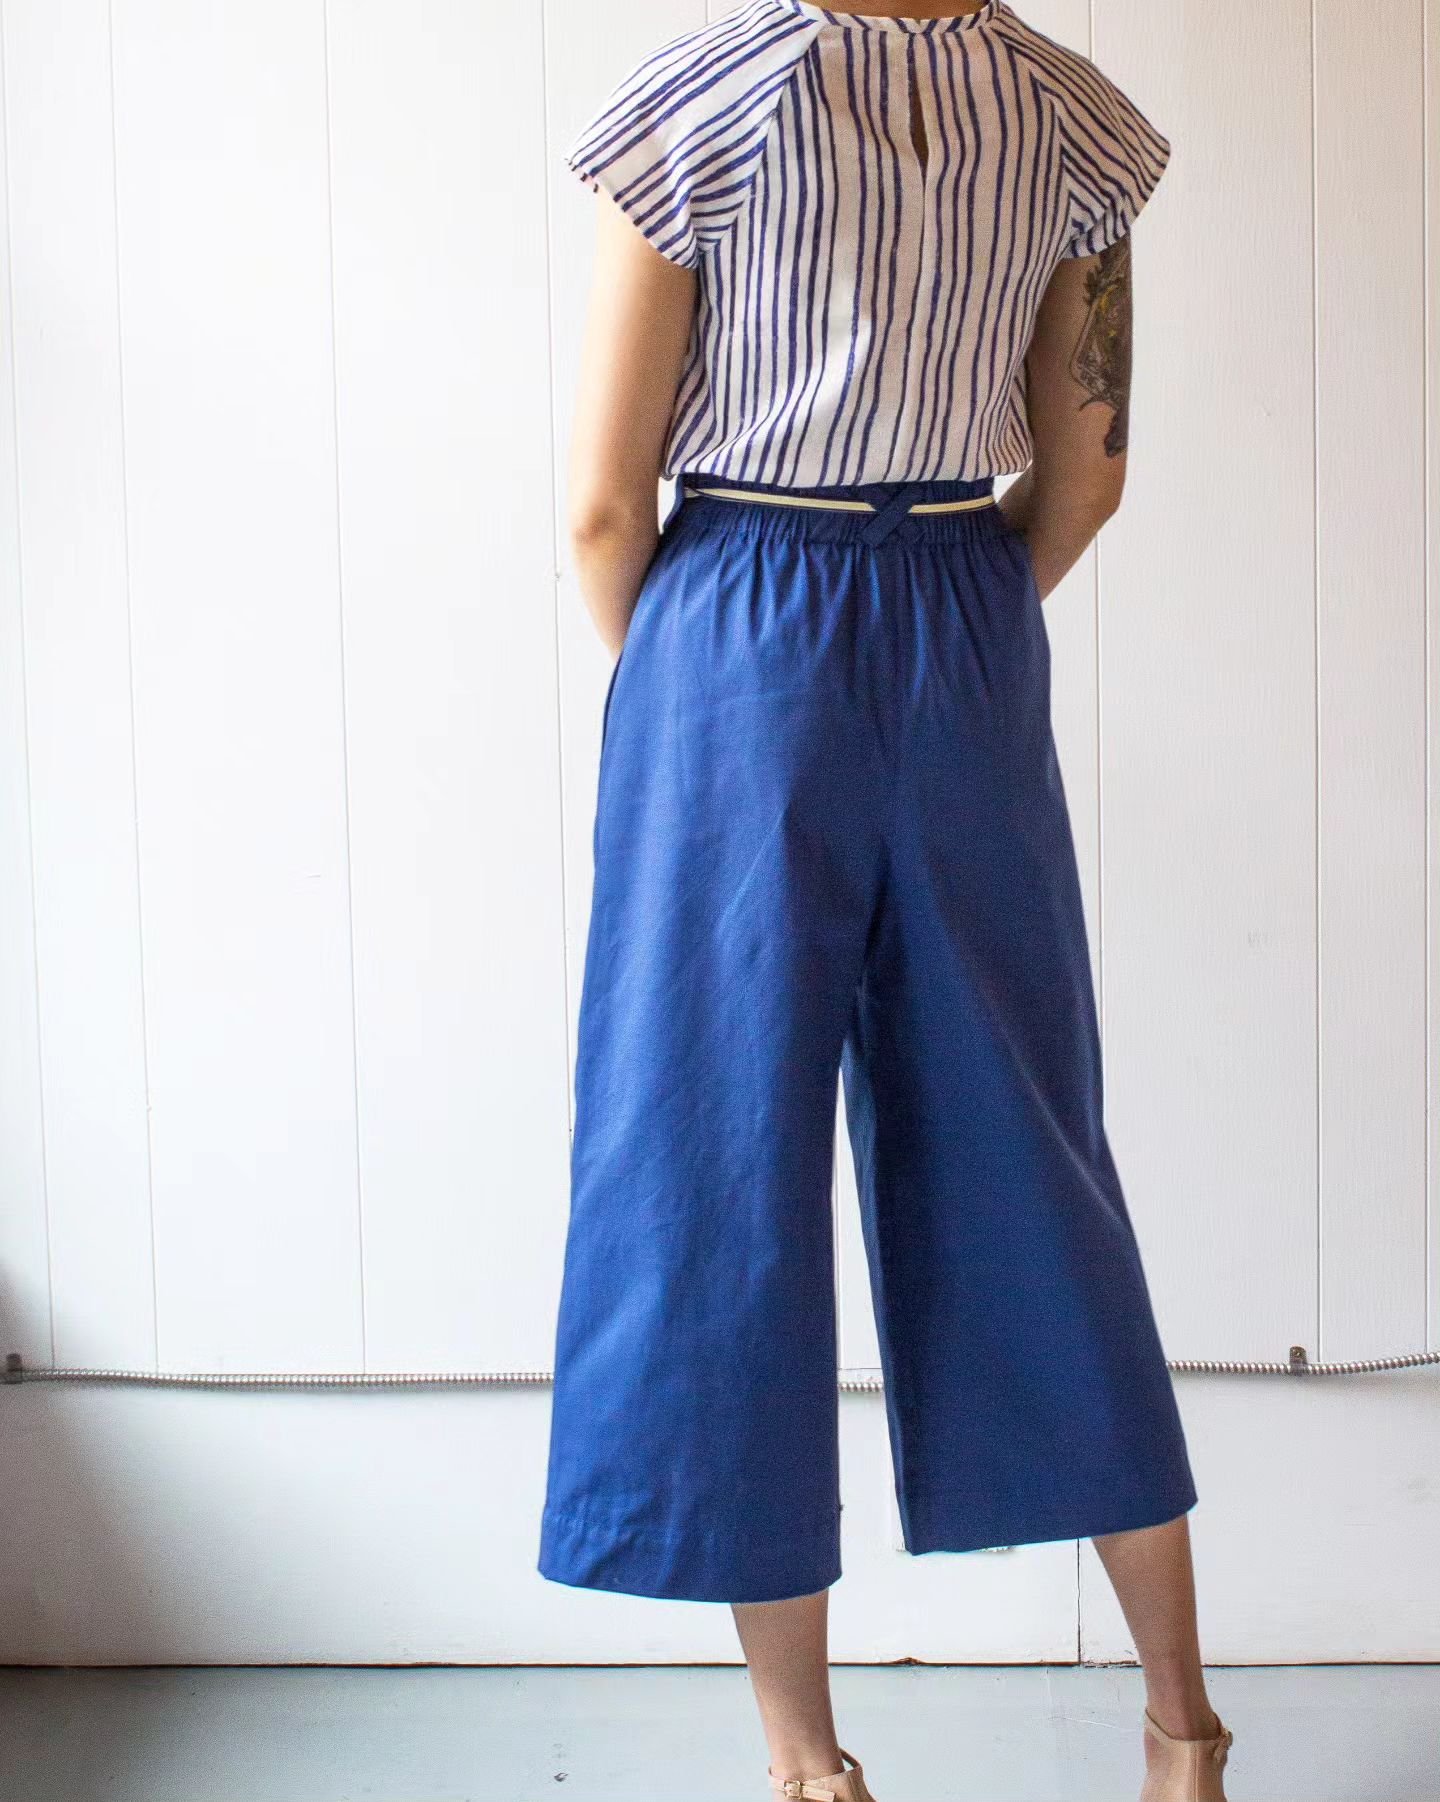 This Friday!  Our Orso pant 👖 will be dropping in the online  shop.  She's an easy to wear, high waist pant with pleating &amp; elasticized waist.  Cut with added ease &amp; straight / wide leg.  Aaaand sleek inseam pockets - deep enough for stashin